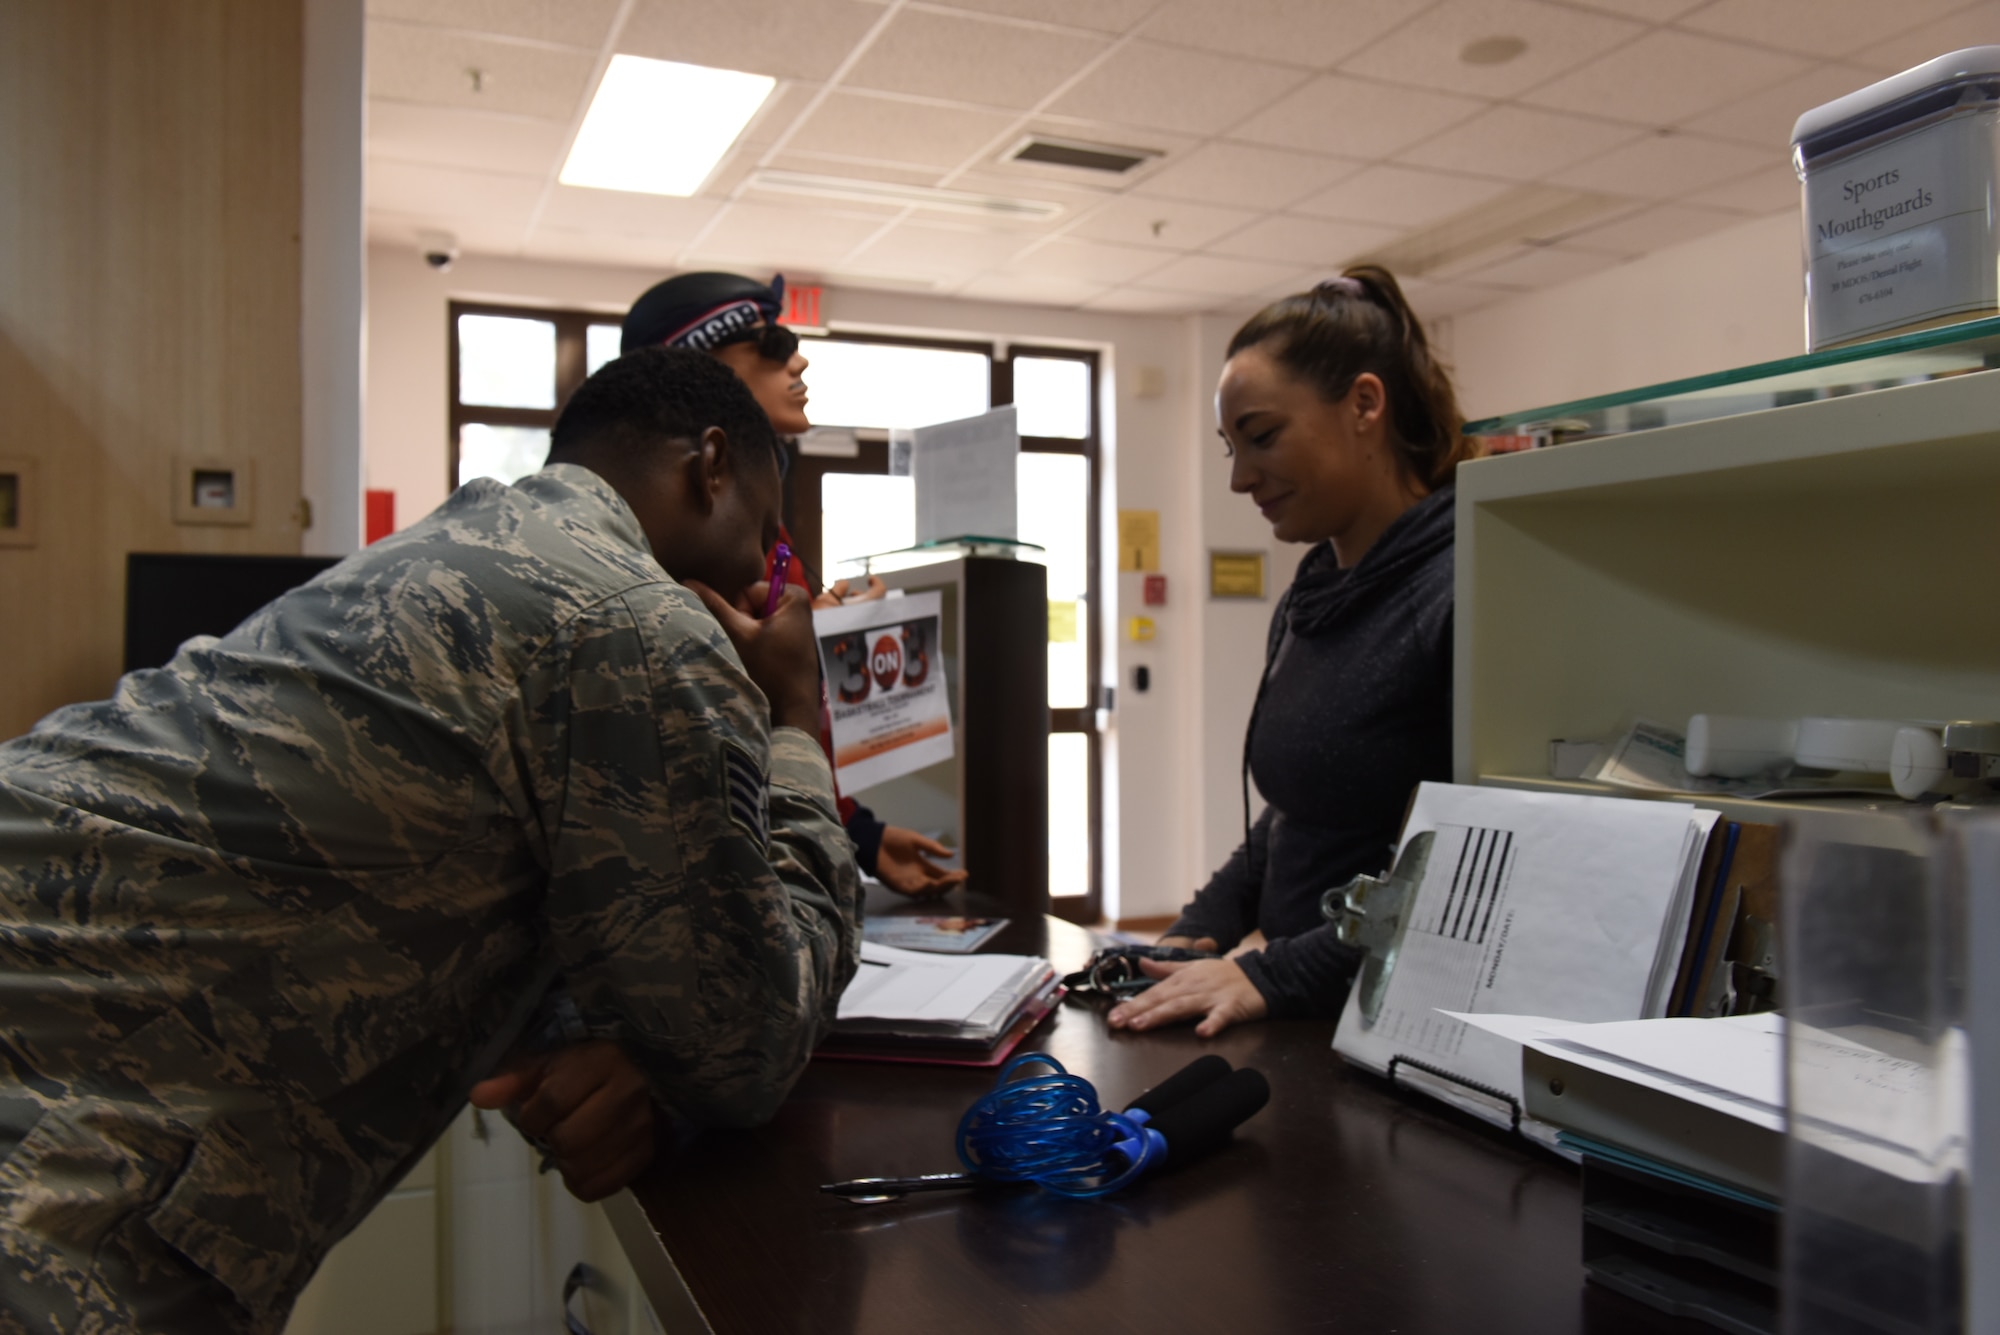 A fitness center supervisor signs a service member up for a fitness center access card.